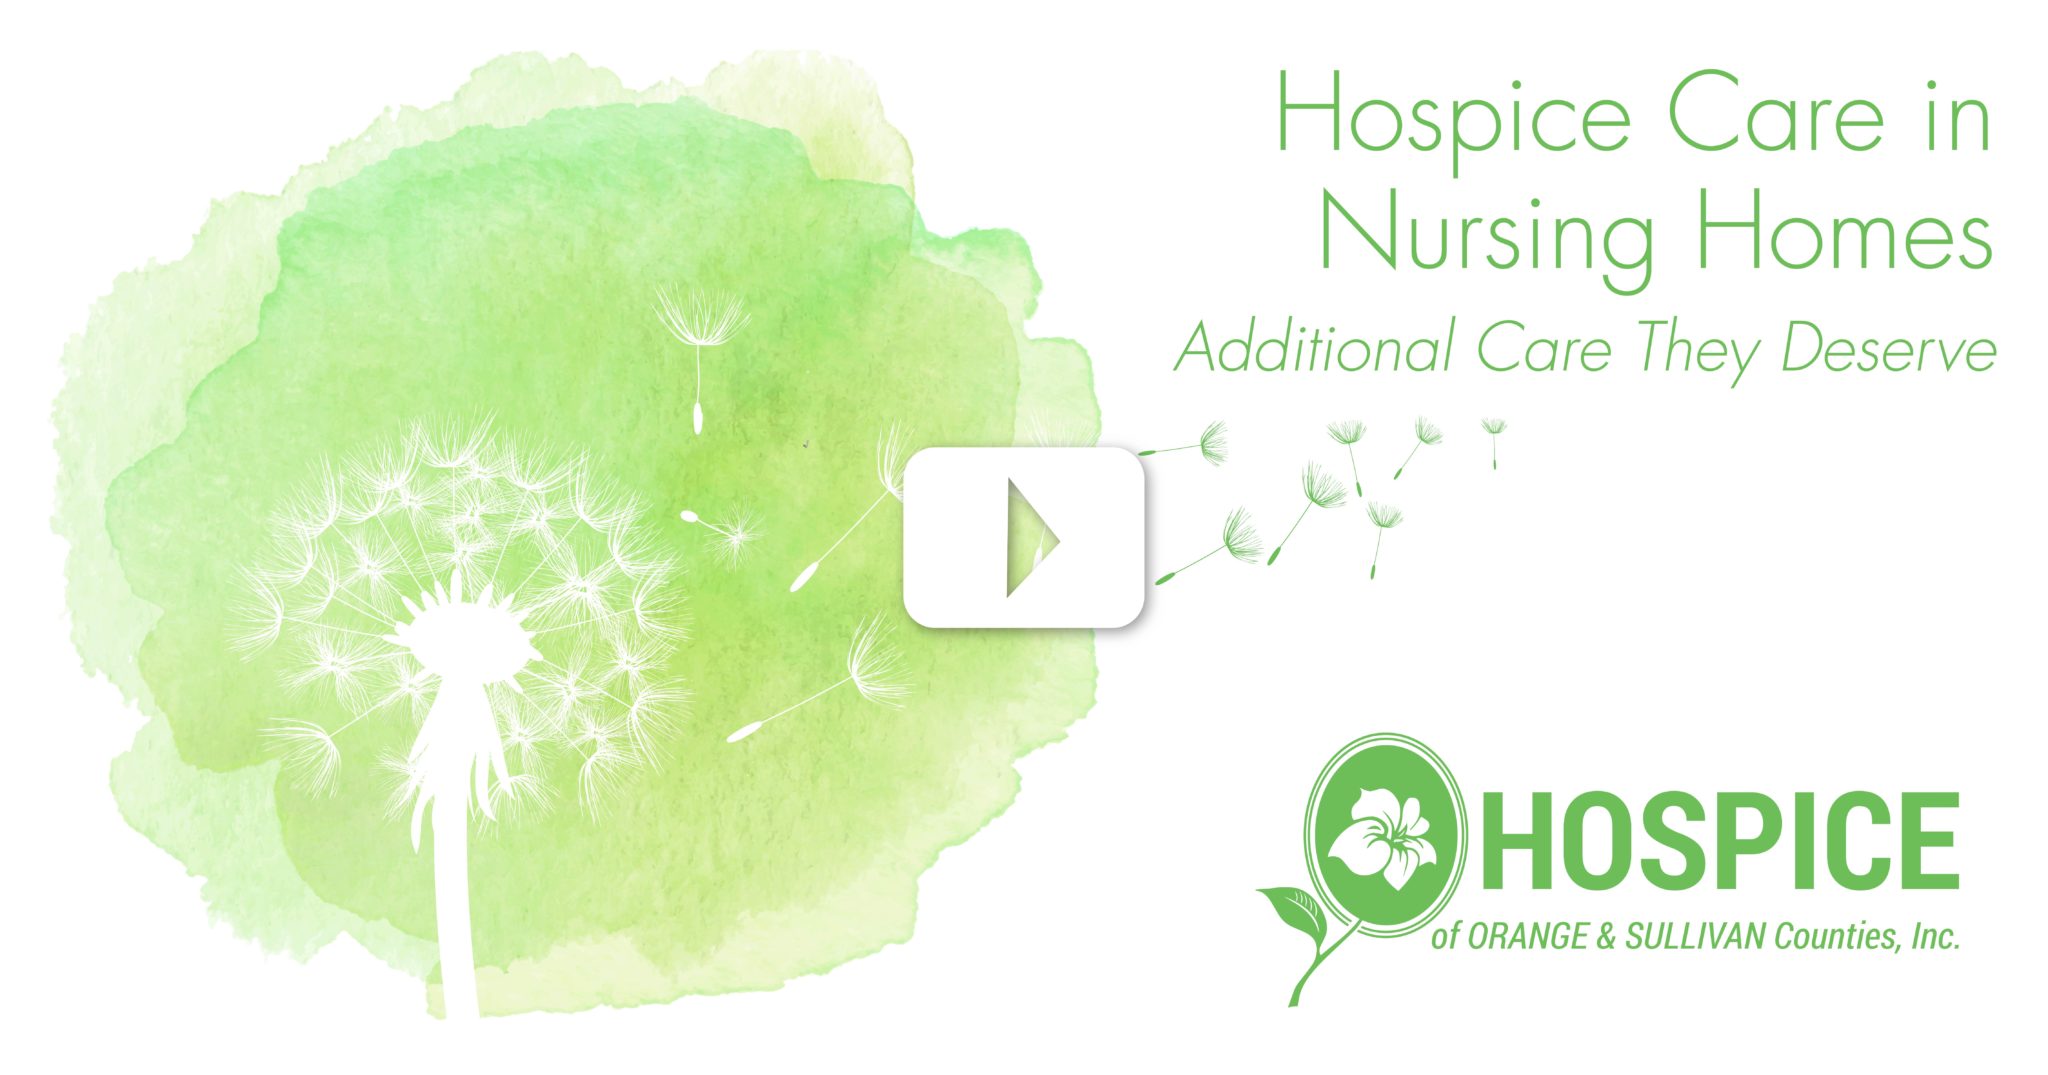 Hospice Care in Nursing Homes Video